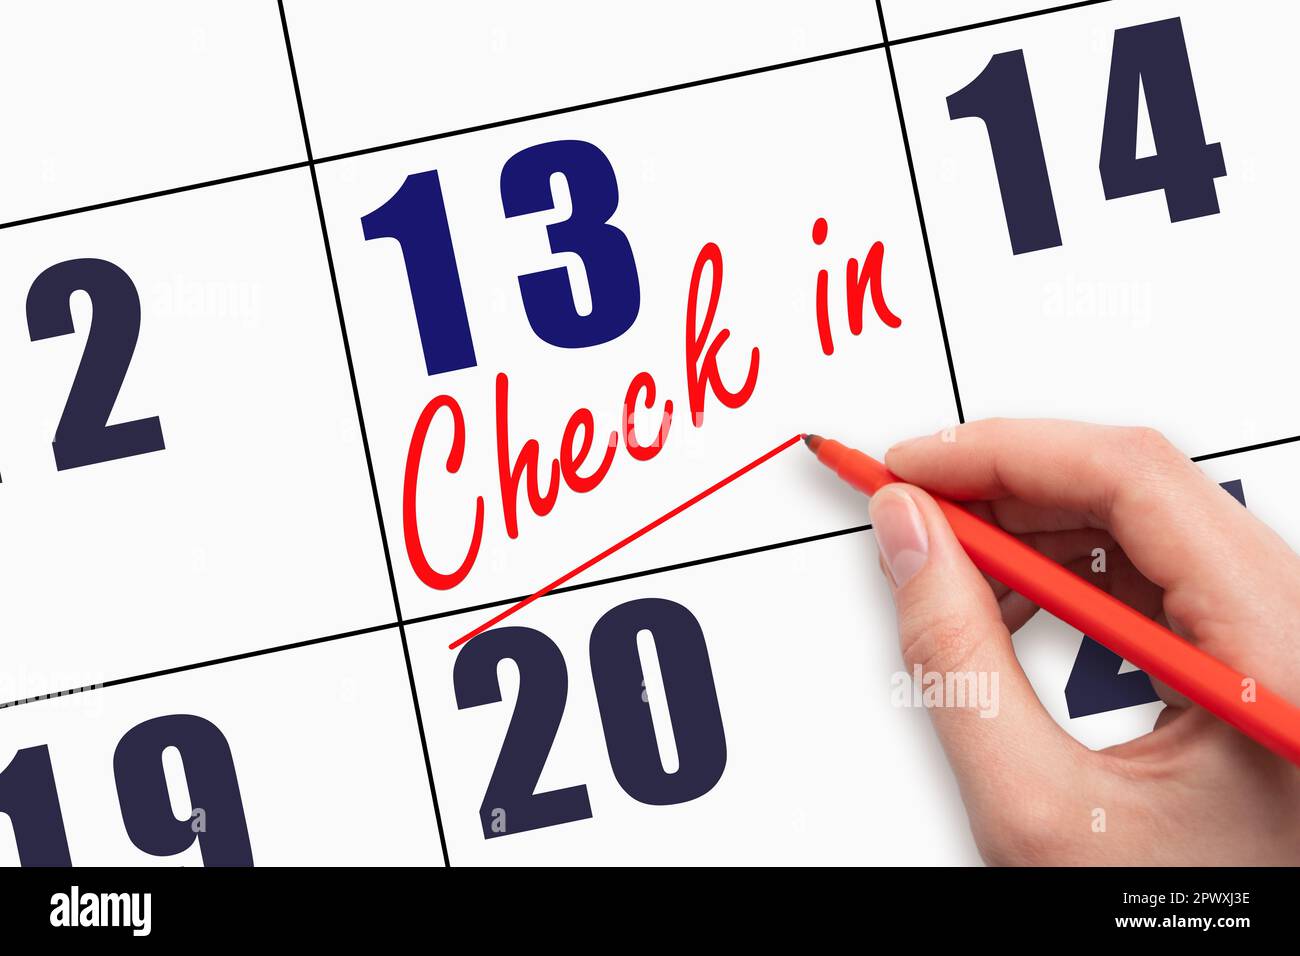 13th day of the month.  Hand writing CHECK IN and drawing a line on calendar date. Business.  Day of the year concept. Stock Photo